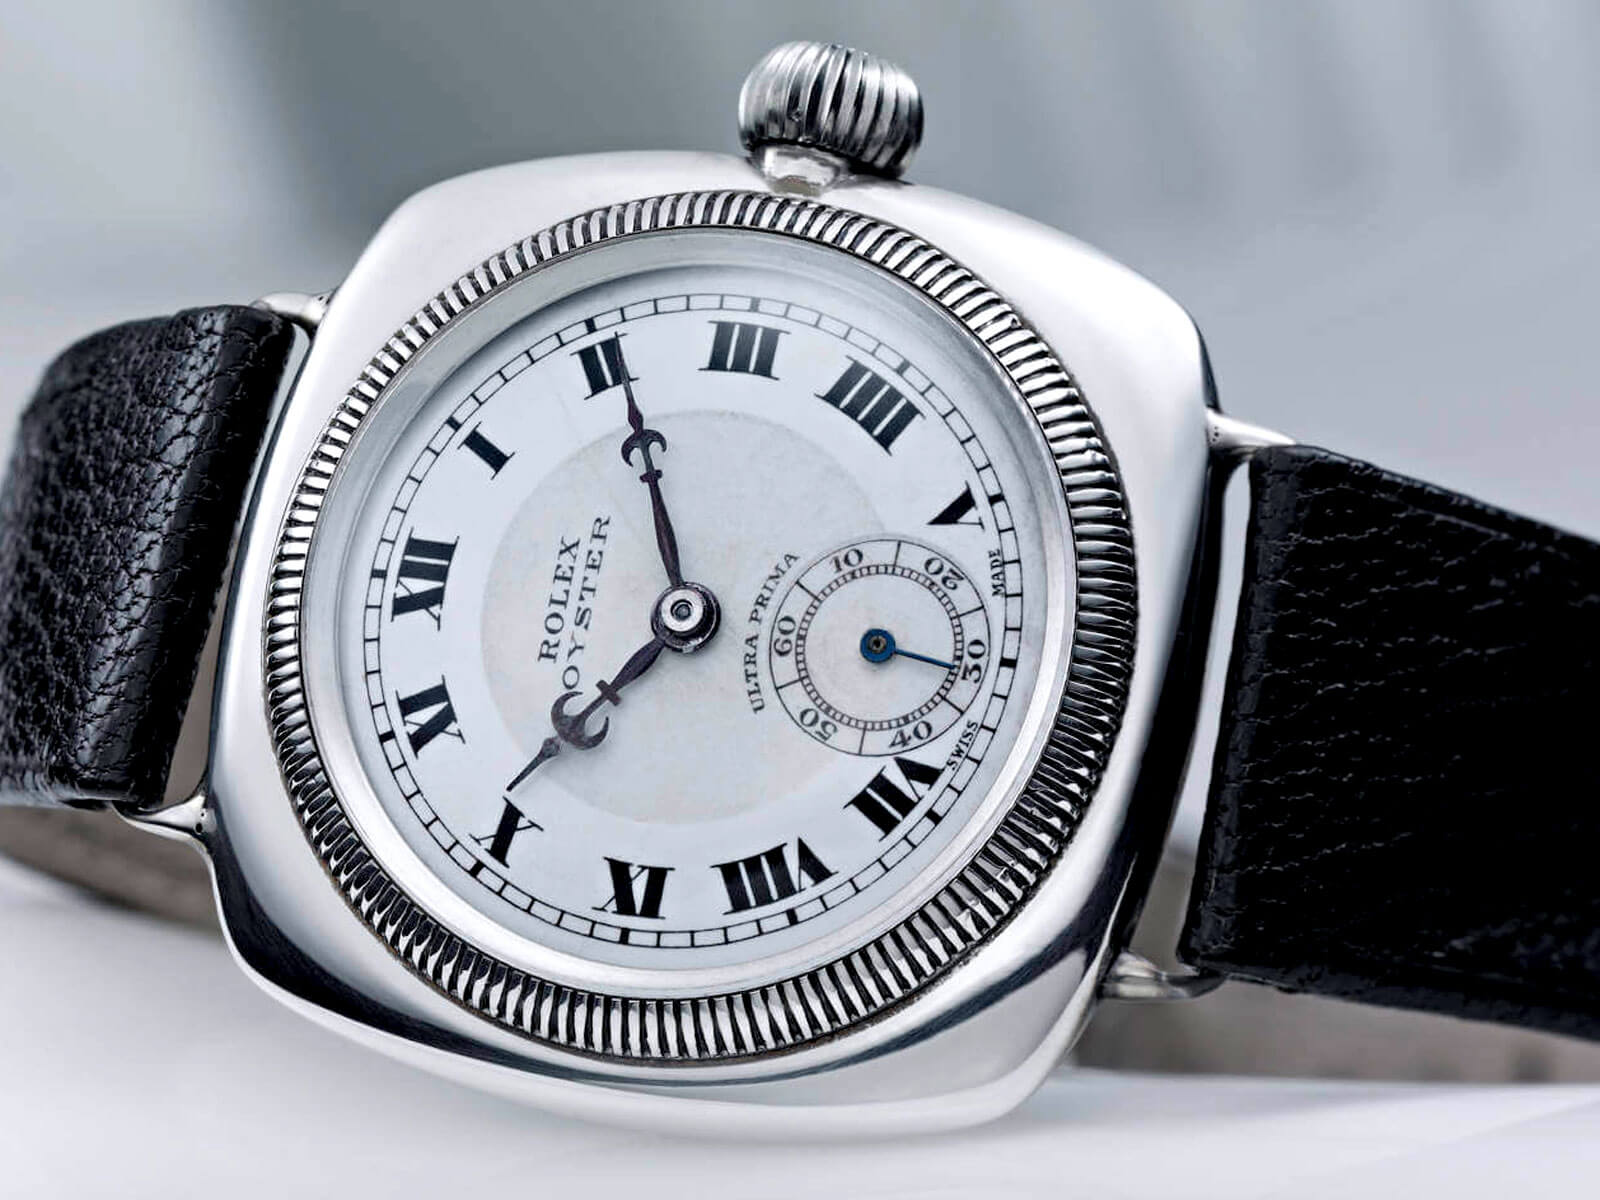 Rolex introduced the first Oyster case in 1926